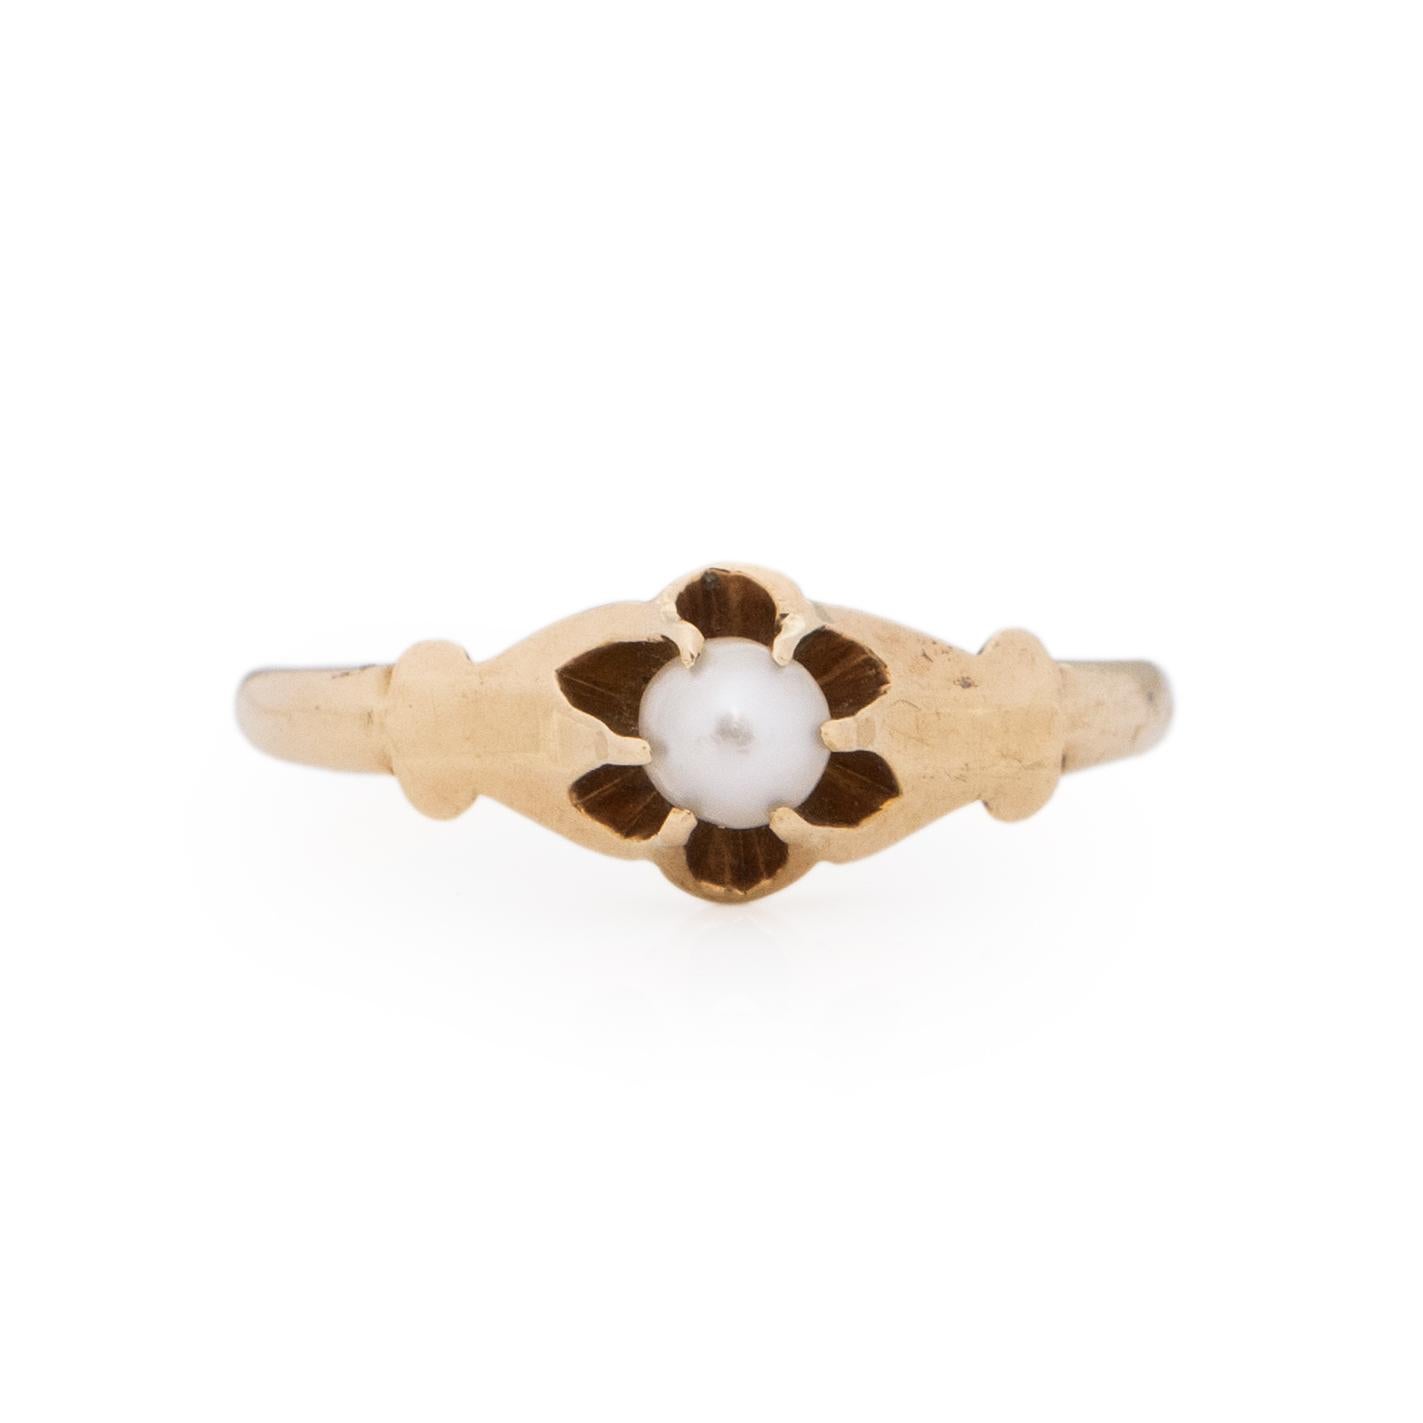 Here we have a cute solitaire pearl, blecher style from the Victorian era. This dainty piece is crafted in 14K yellow gold with very minimal detail, this allows the focus to be the pearl center. The small tapering details of the shank lead to the